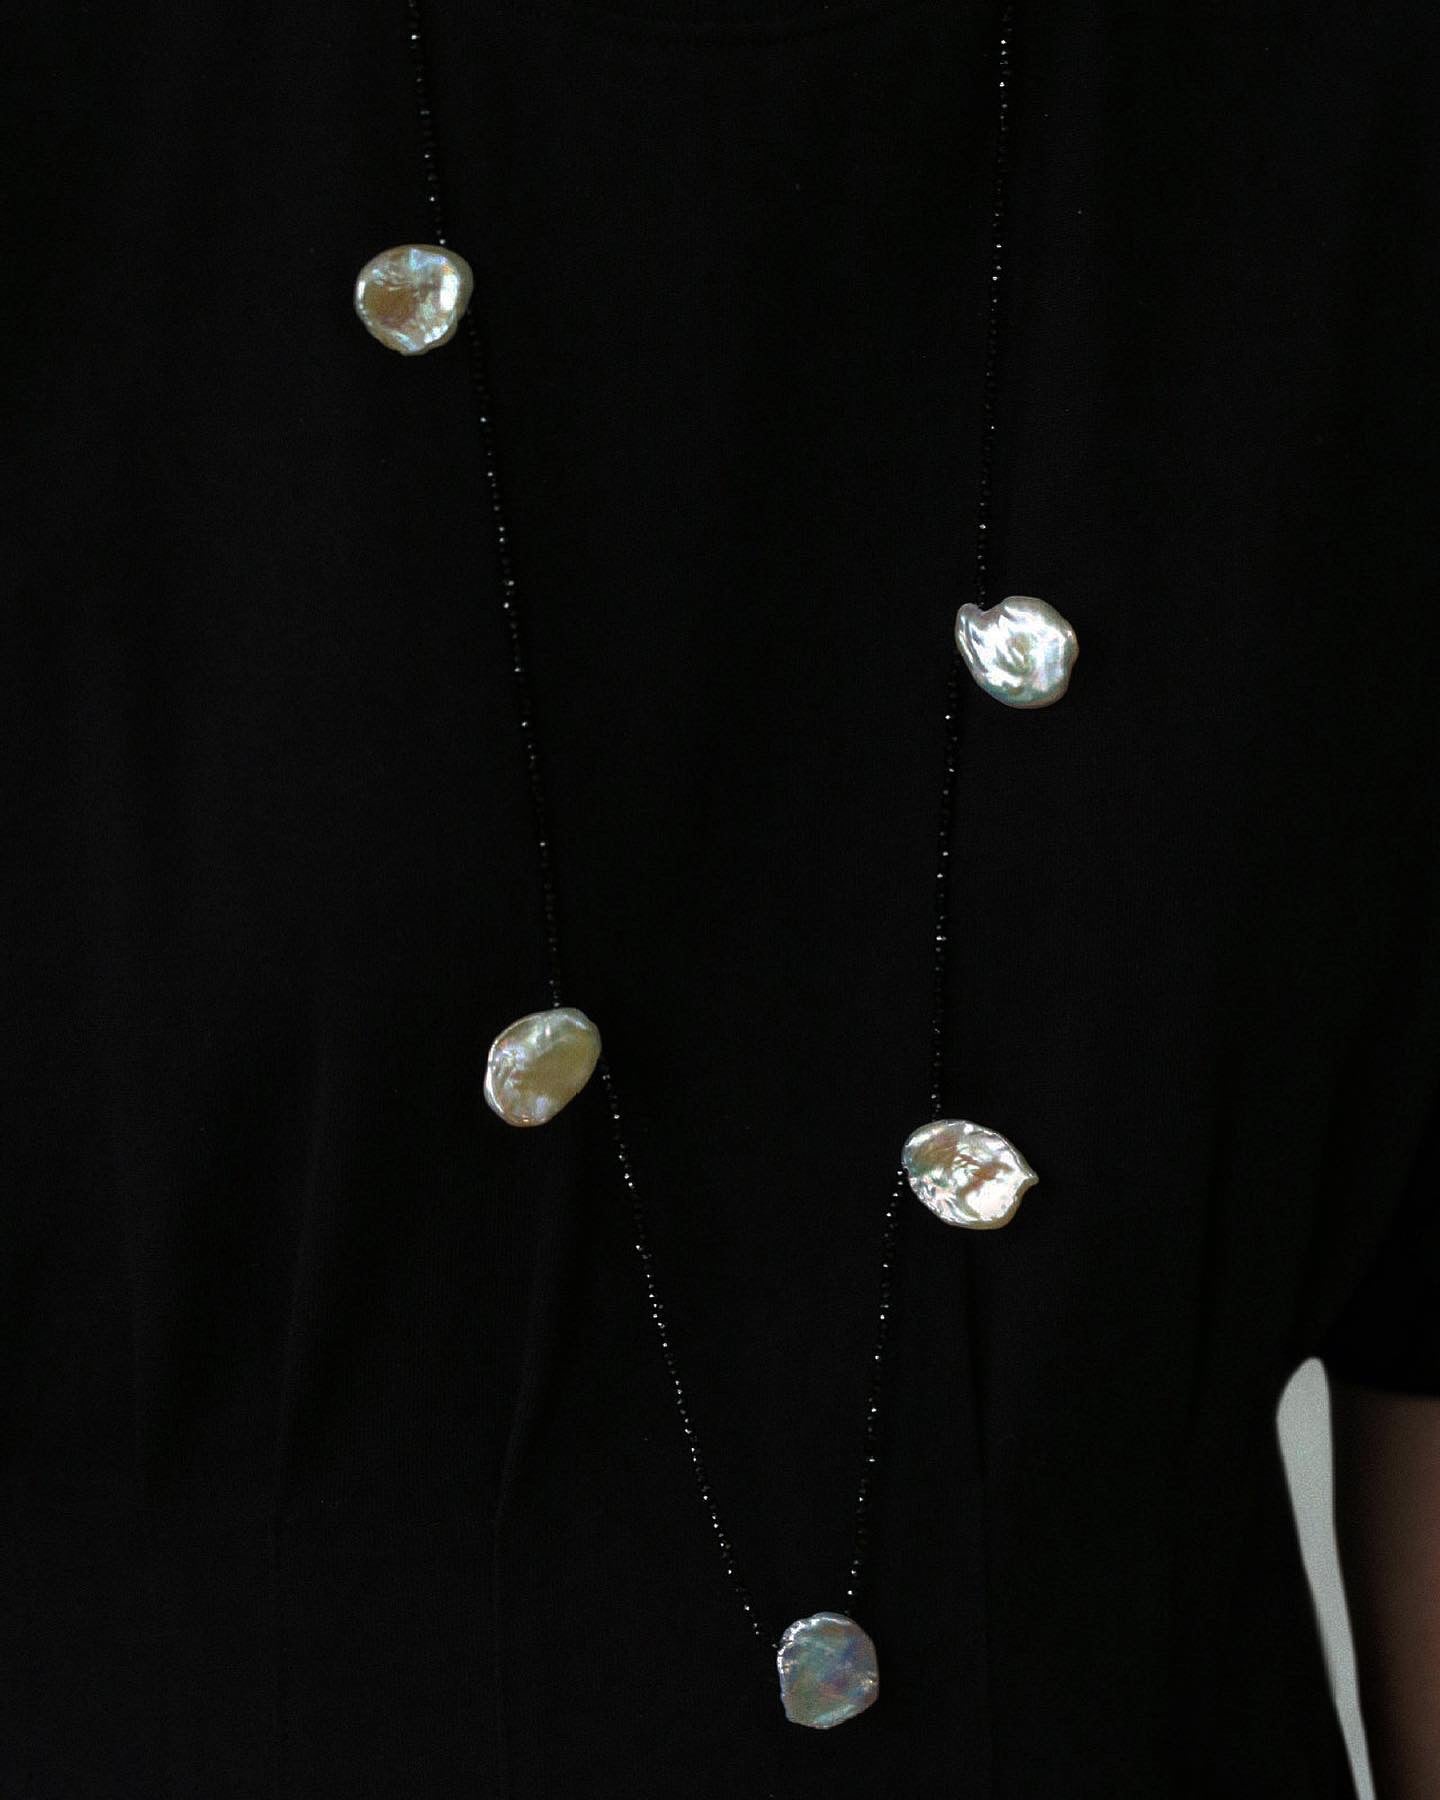 Rothko Petal Pearl Black Spinel Necklace